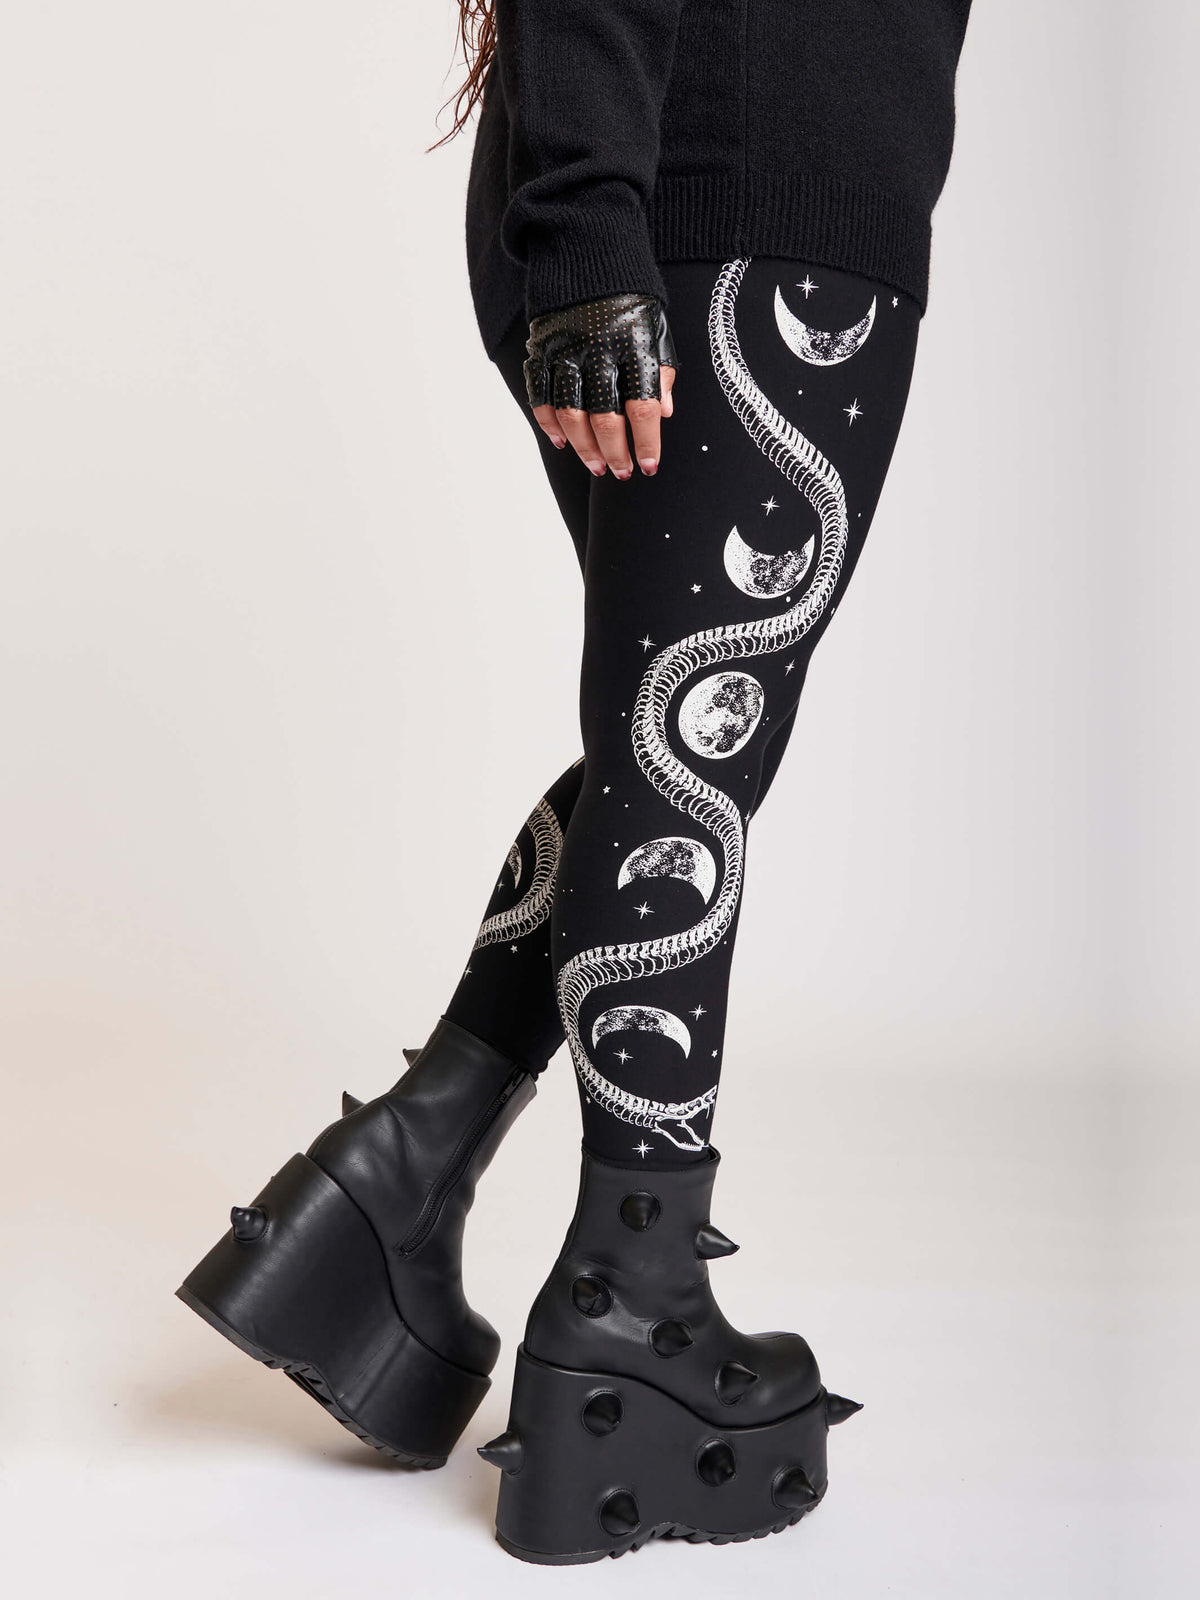 Black legging with skeleton snake and moon phase graphibs down the sides.